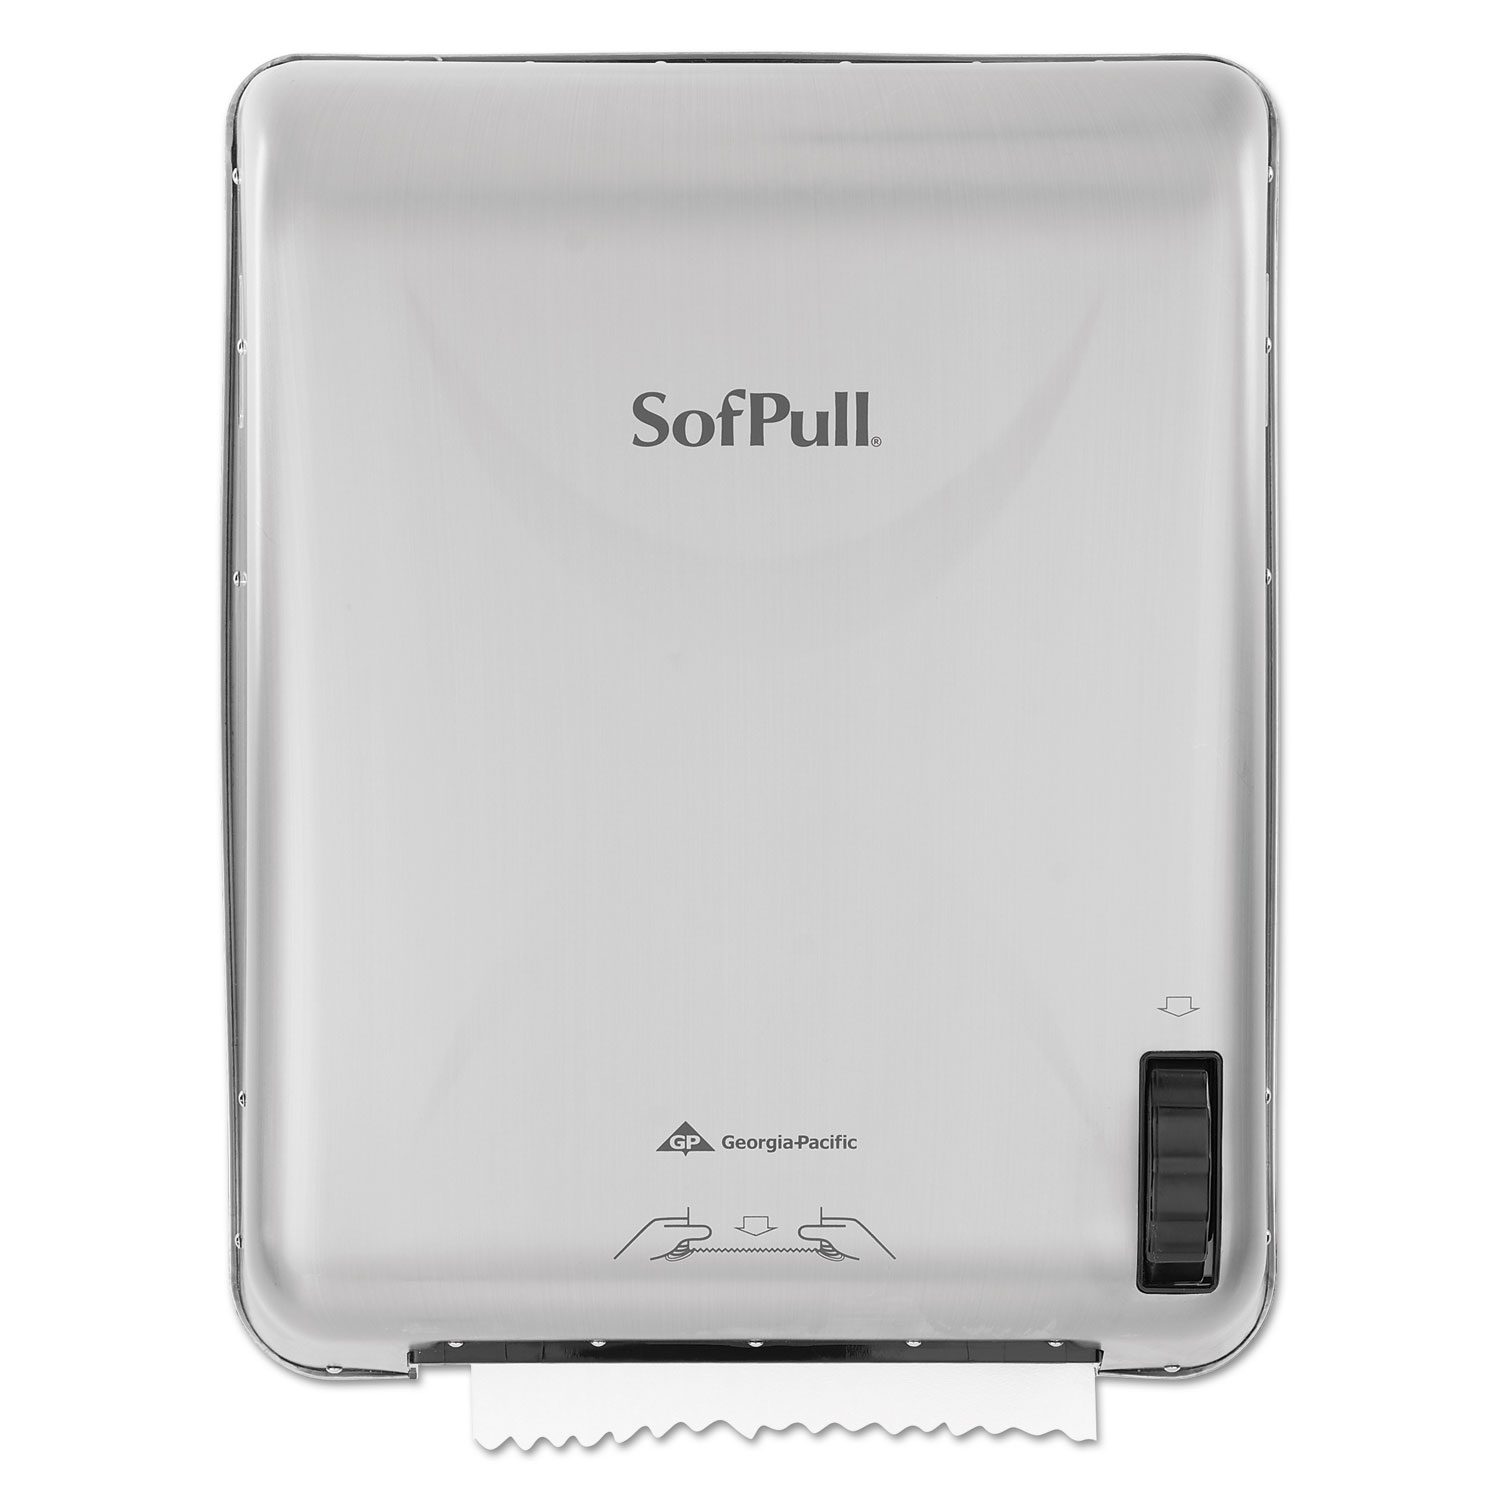 SofPull Recessed Mechanical Towel Dispenser, Stainless Steel, 15 x 10 x 18